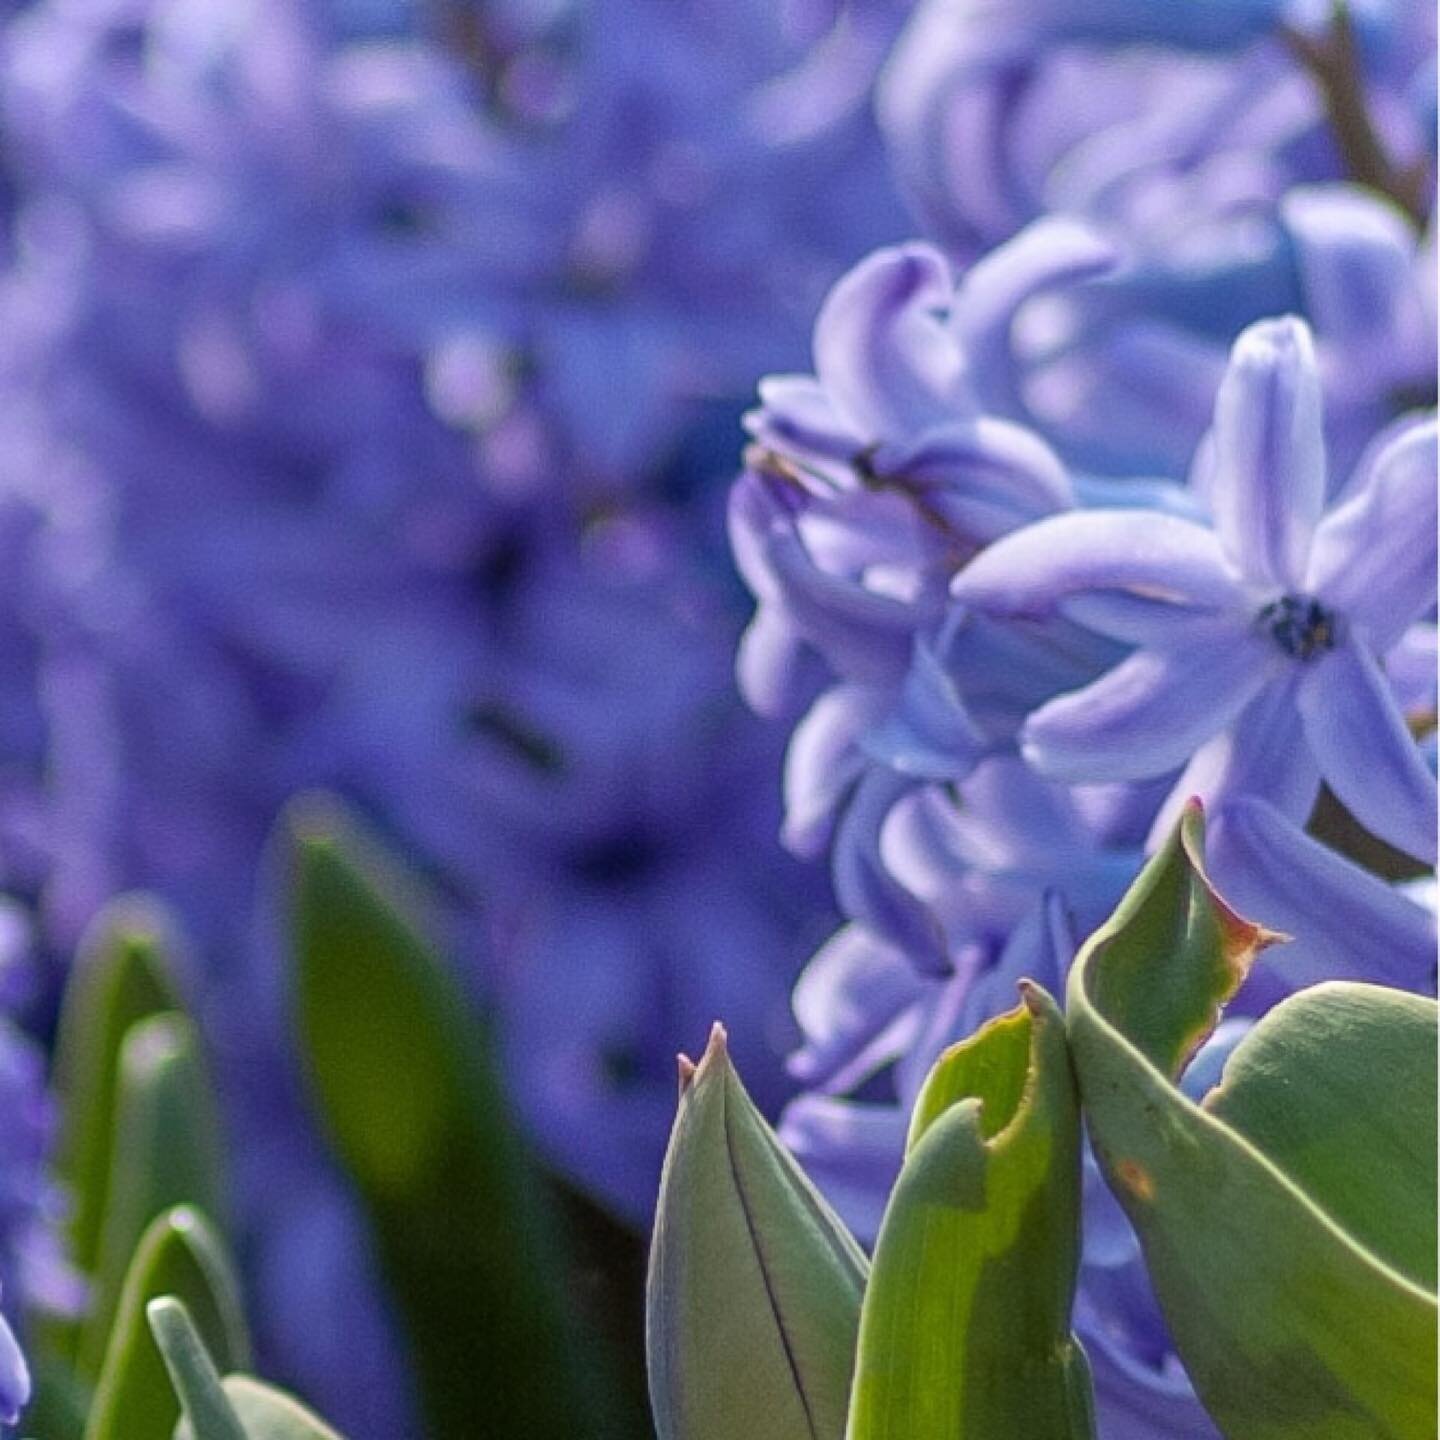 Hyacinthus was beautiful and admired by the God Apollo and the west wind Zephyros. Hyacinthus chose Apollo over Zephyros. He was killed while practicing throwing a discus. Some say Apollo threw his discus so hard that it killed Hyacinthus when he tri